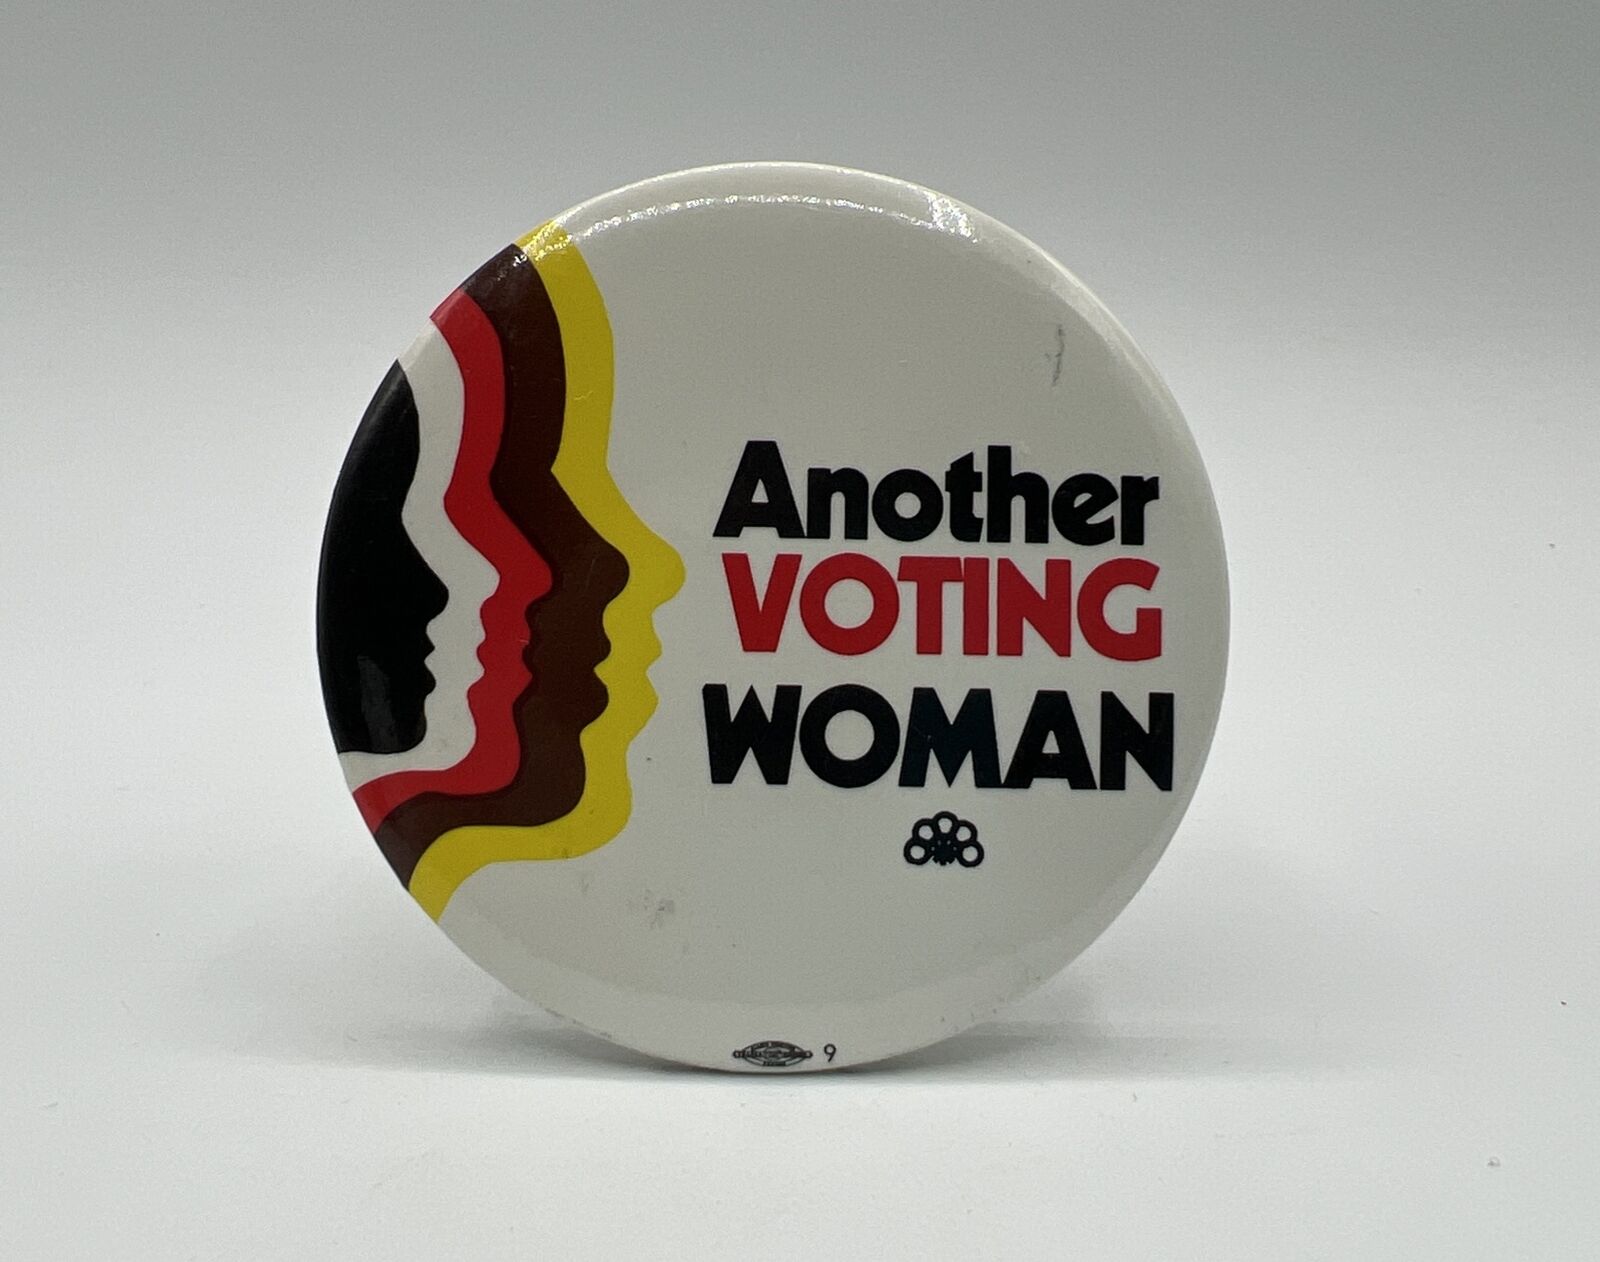 Vintage Women Equal Rights Equality Woman Voting Politics Pin Pinback Button